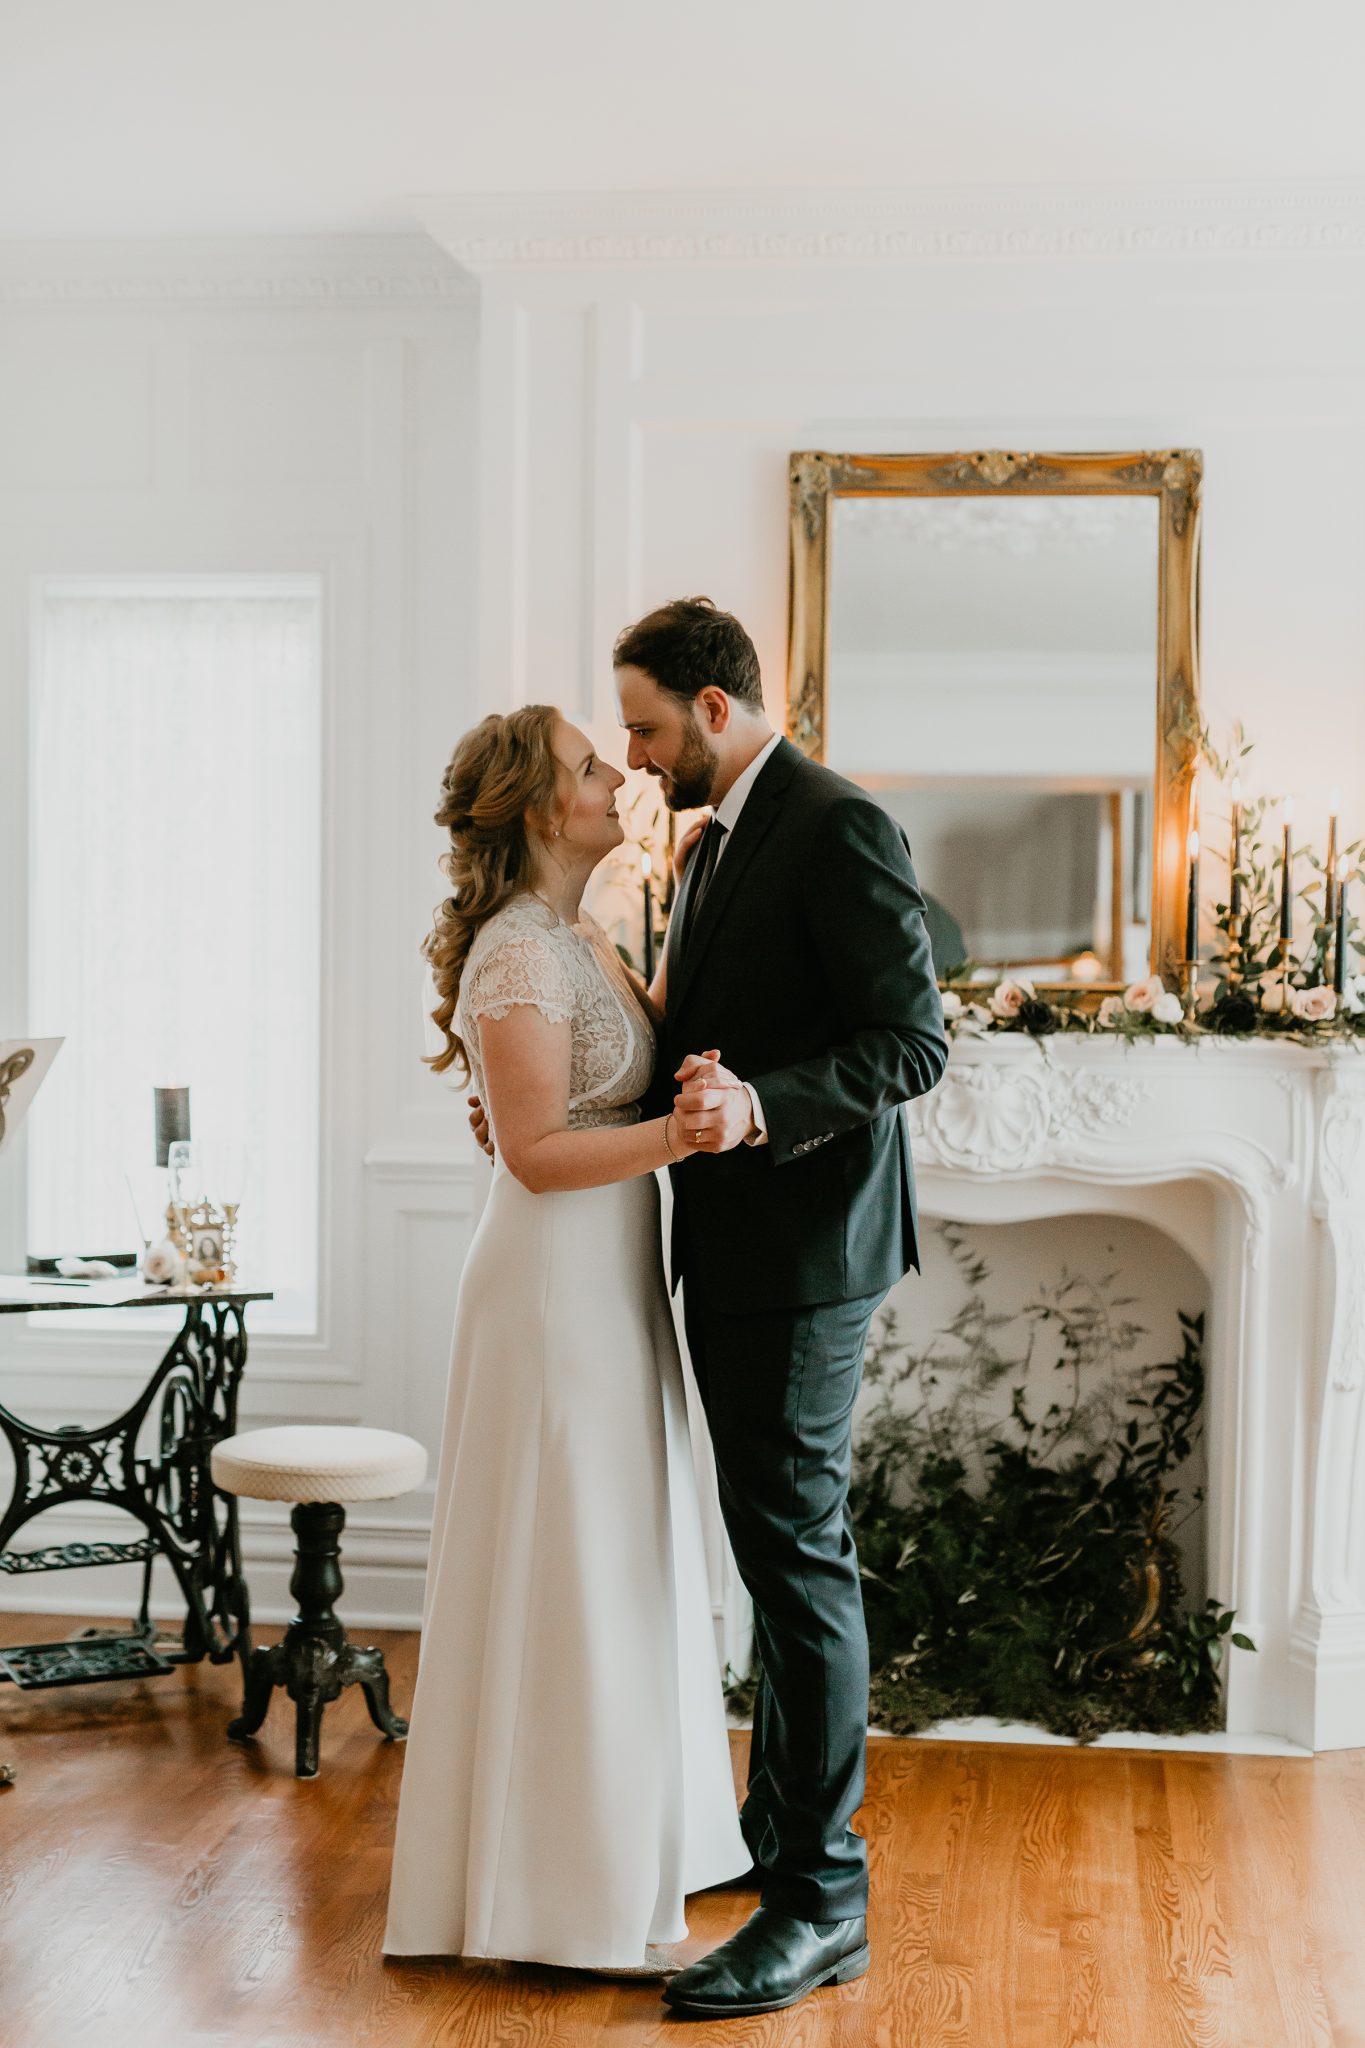 Bride and groom share a first dance in front of styled fireplace for their living room minimony